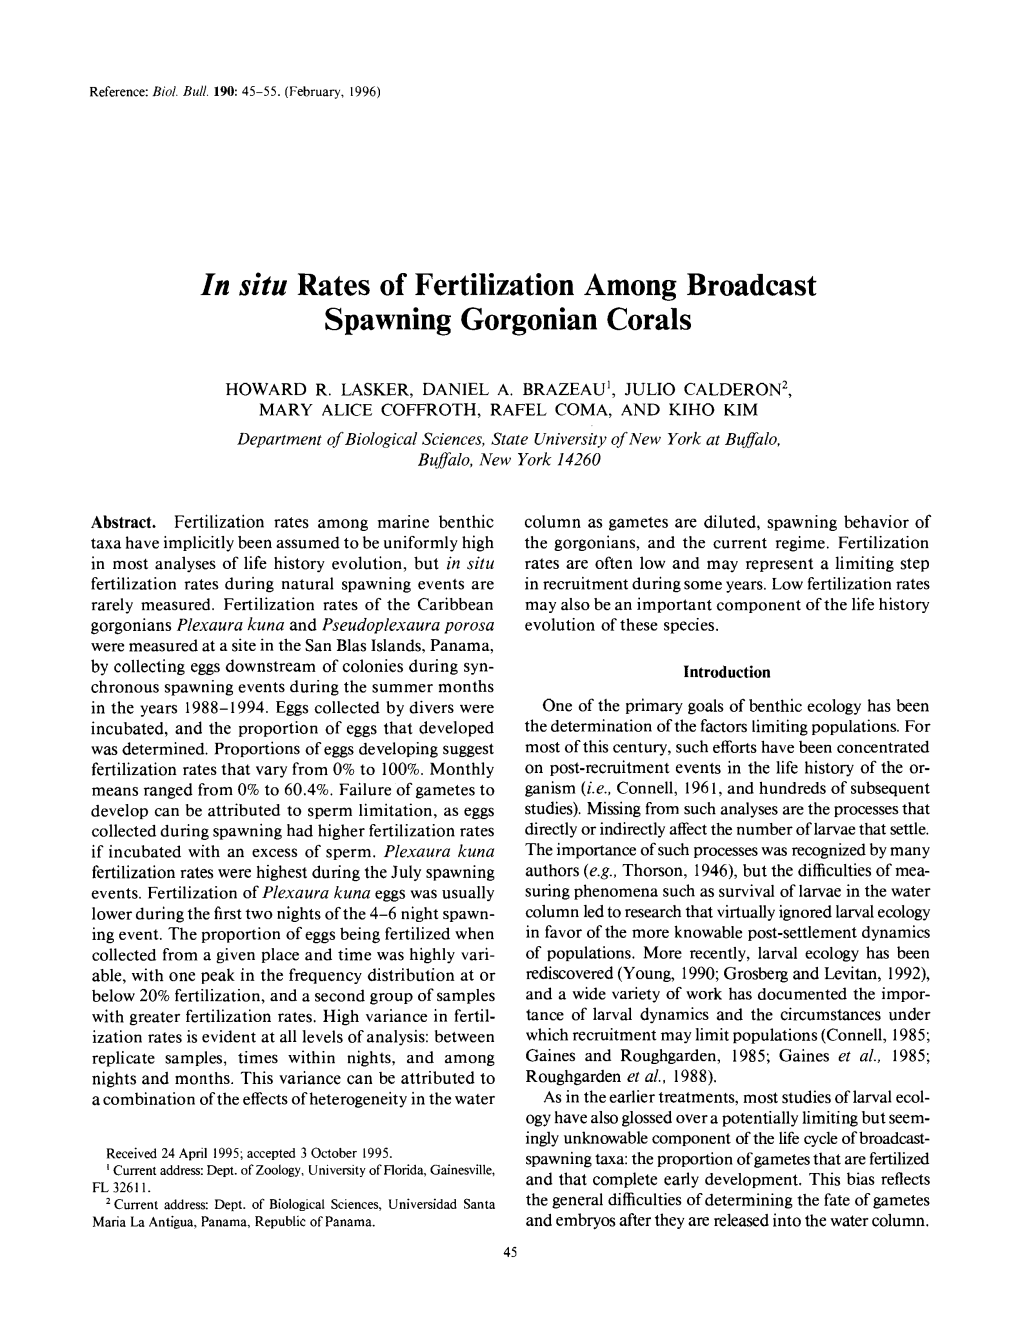 In Situ Rates of Fertilization Among Broadcast Spawning Gorgonian Corals